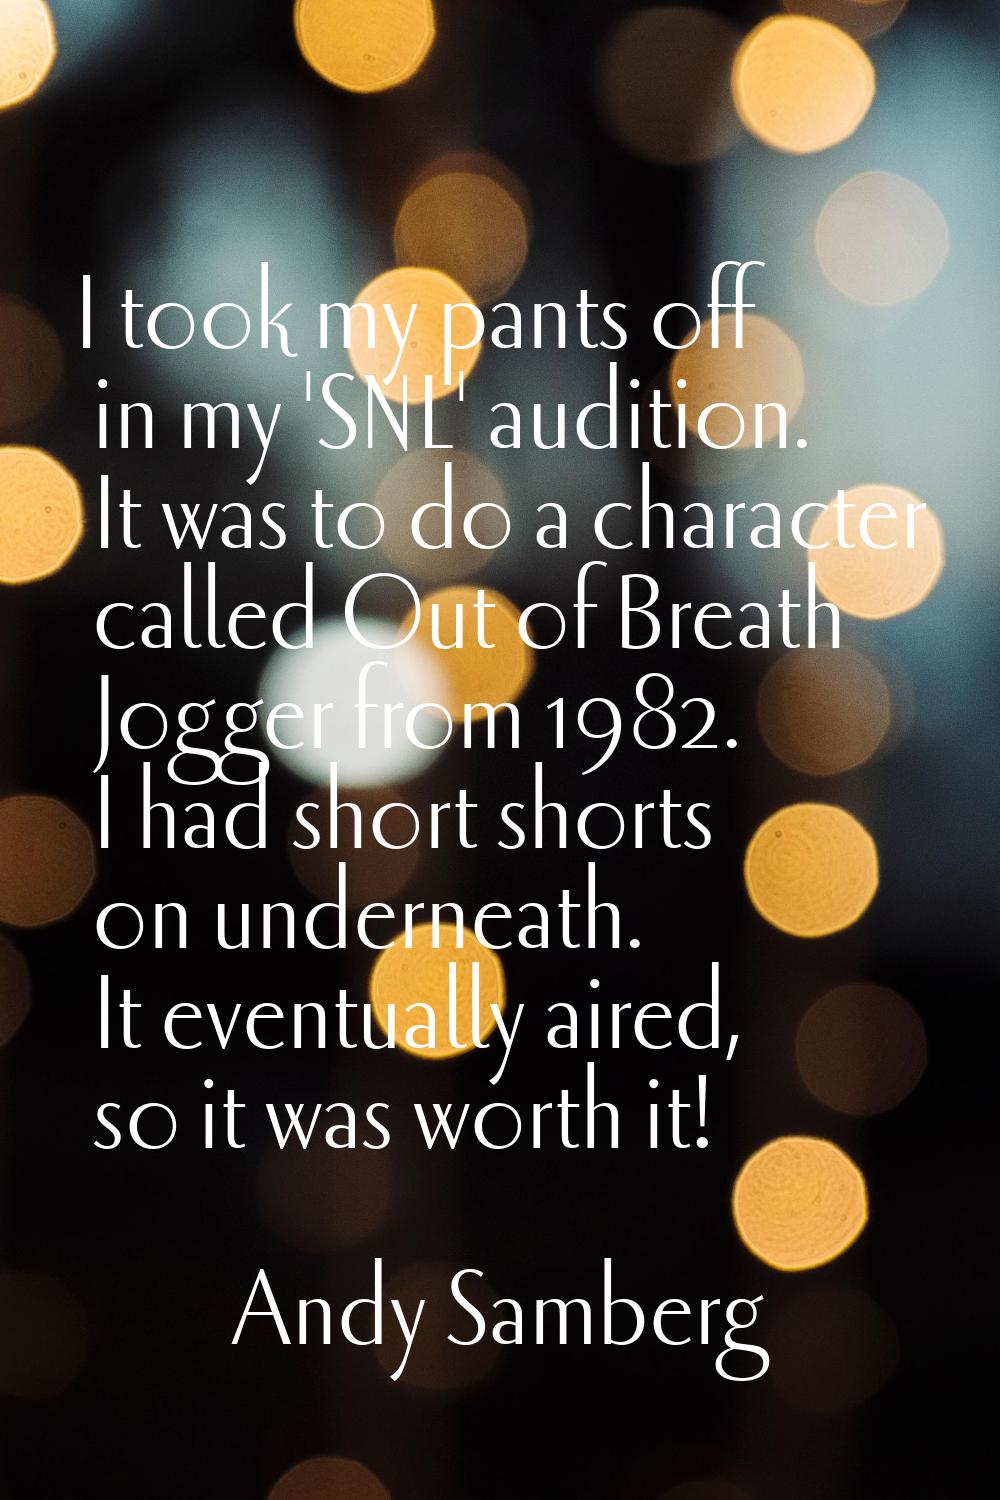 I took my pants off in my 'SNL' audition. It was to do a character called Out of Breath Jogger from